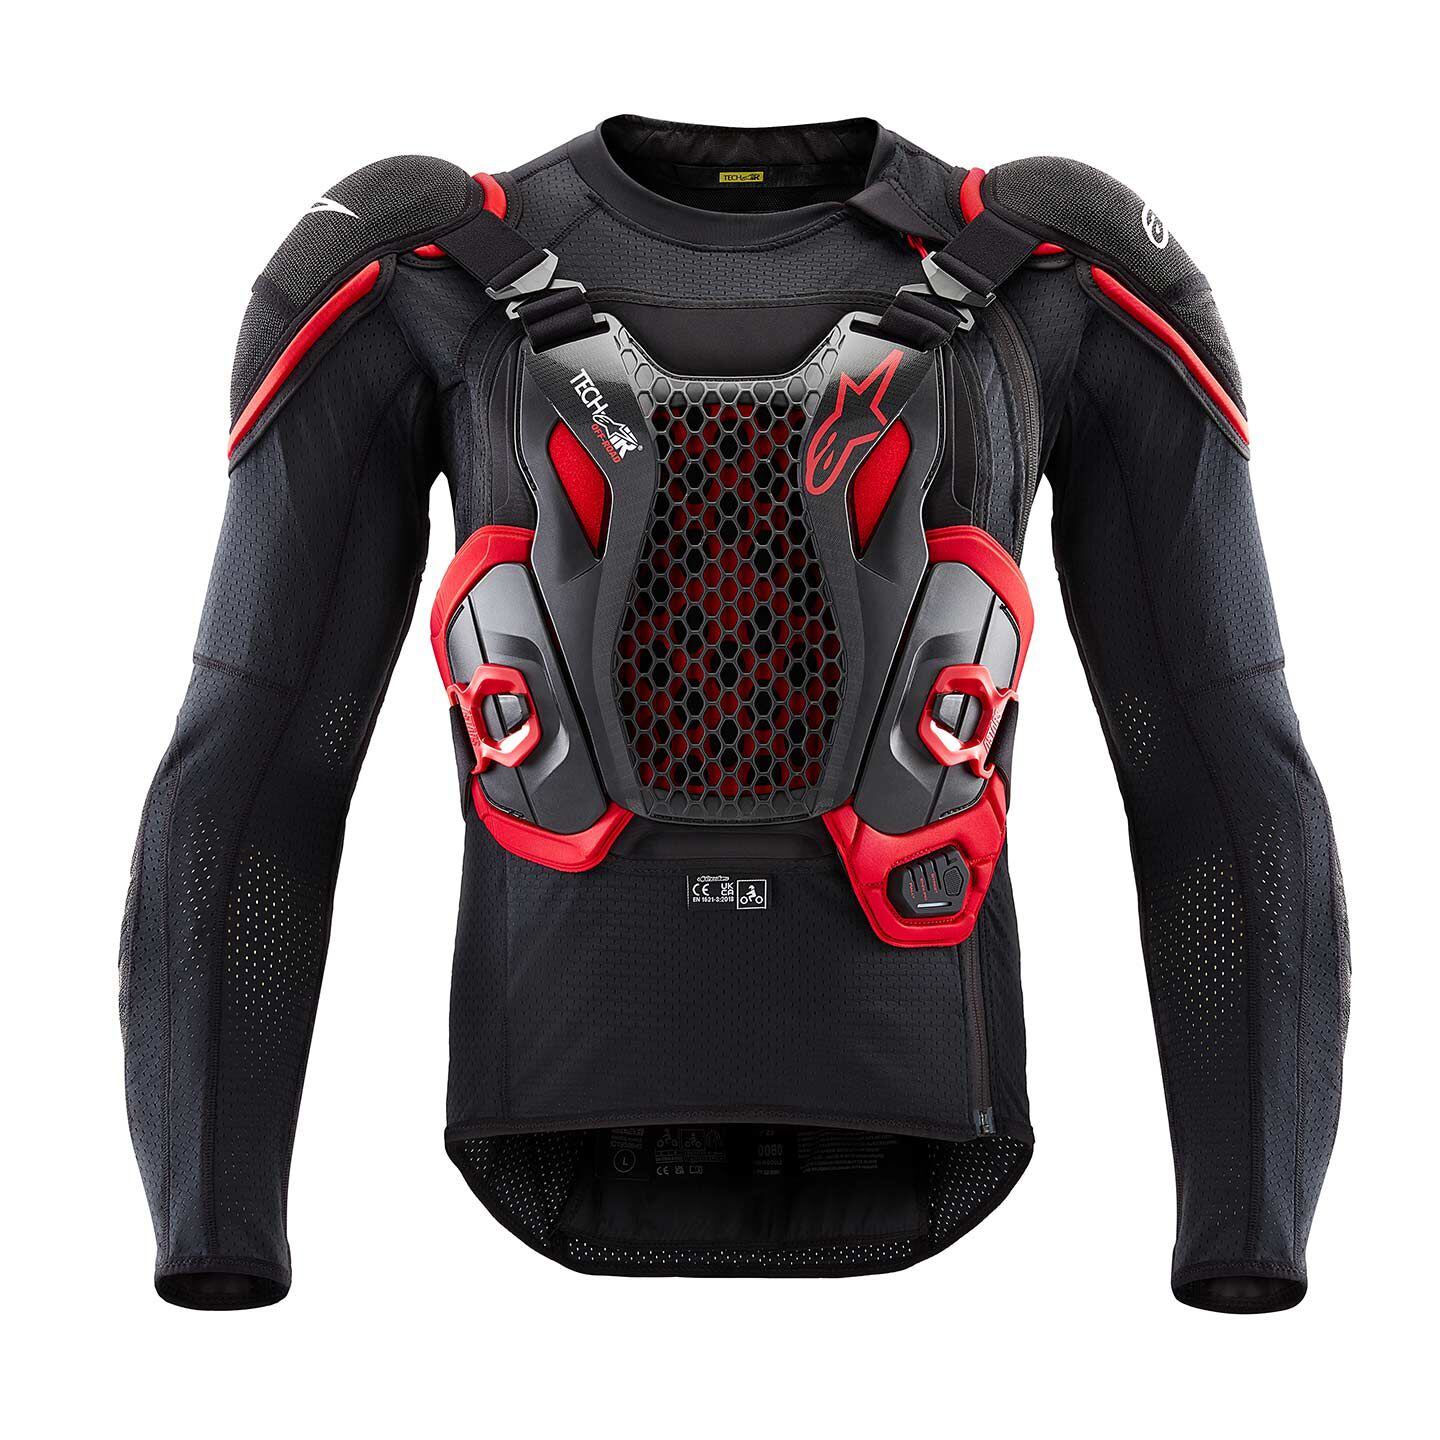 Alpinestars Tech-Air off-road vest is a self-contained motorcycle airbag vest that offers two individual deployments in the case of a moderate to high-energy crash.